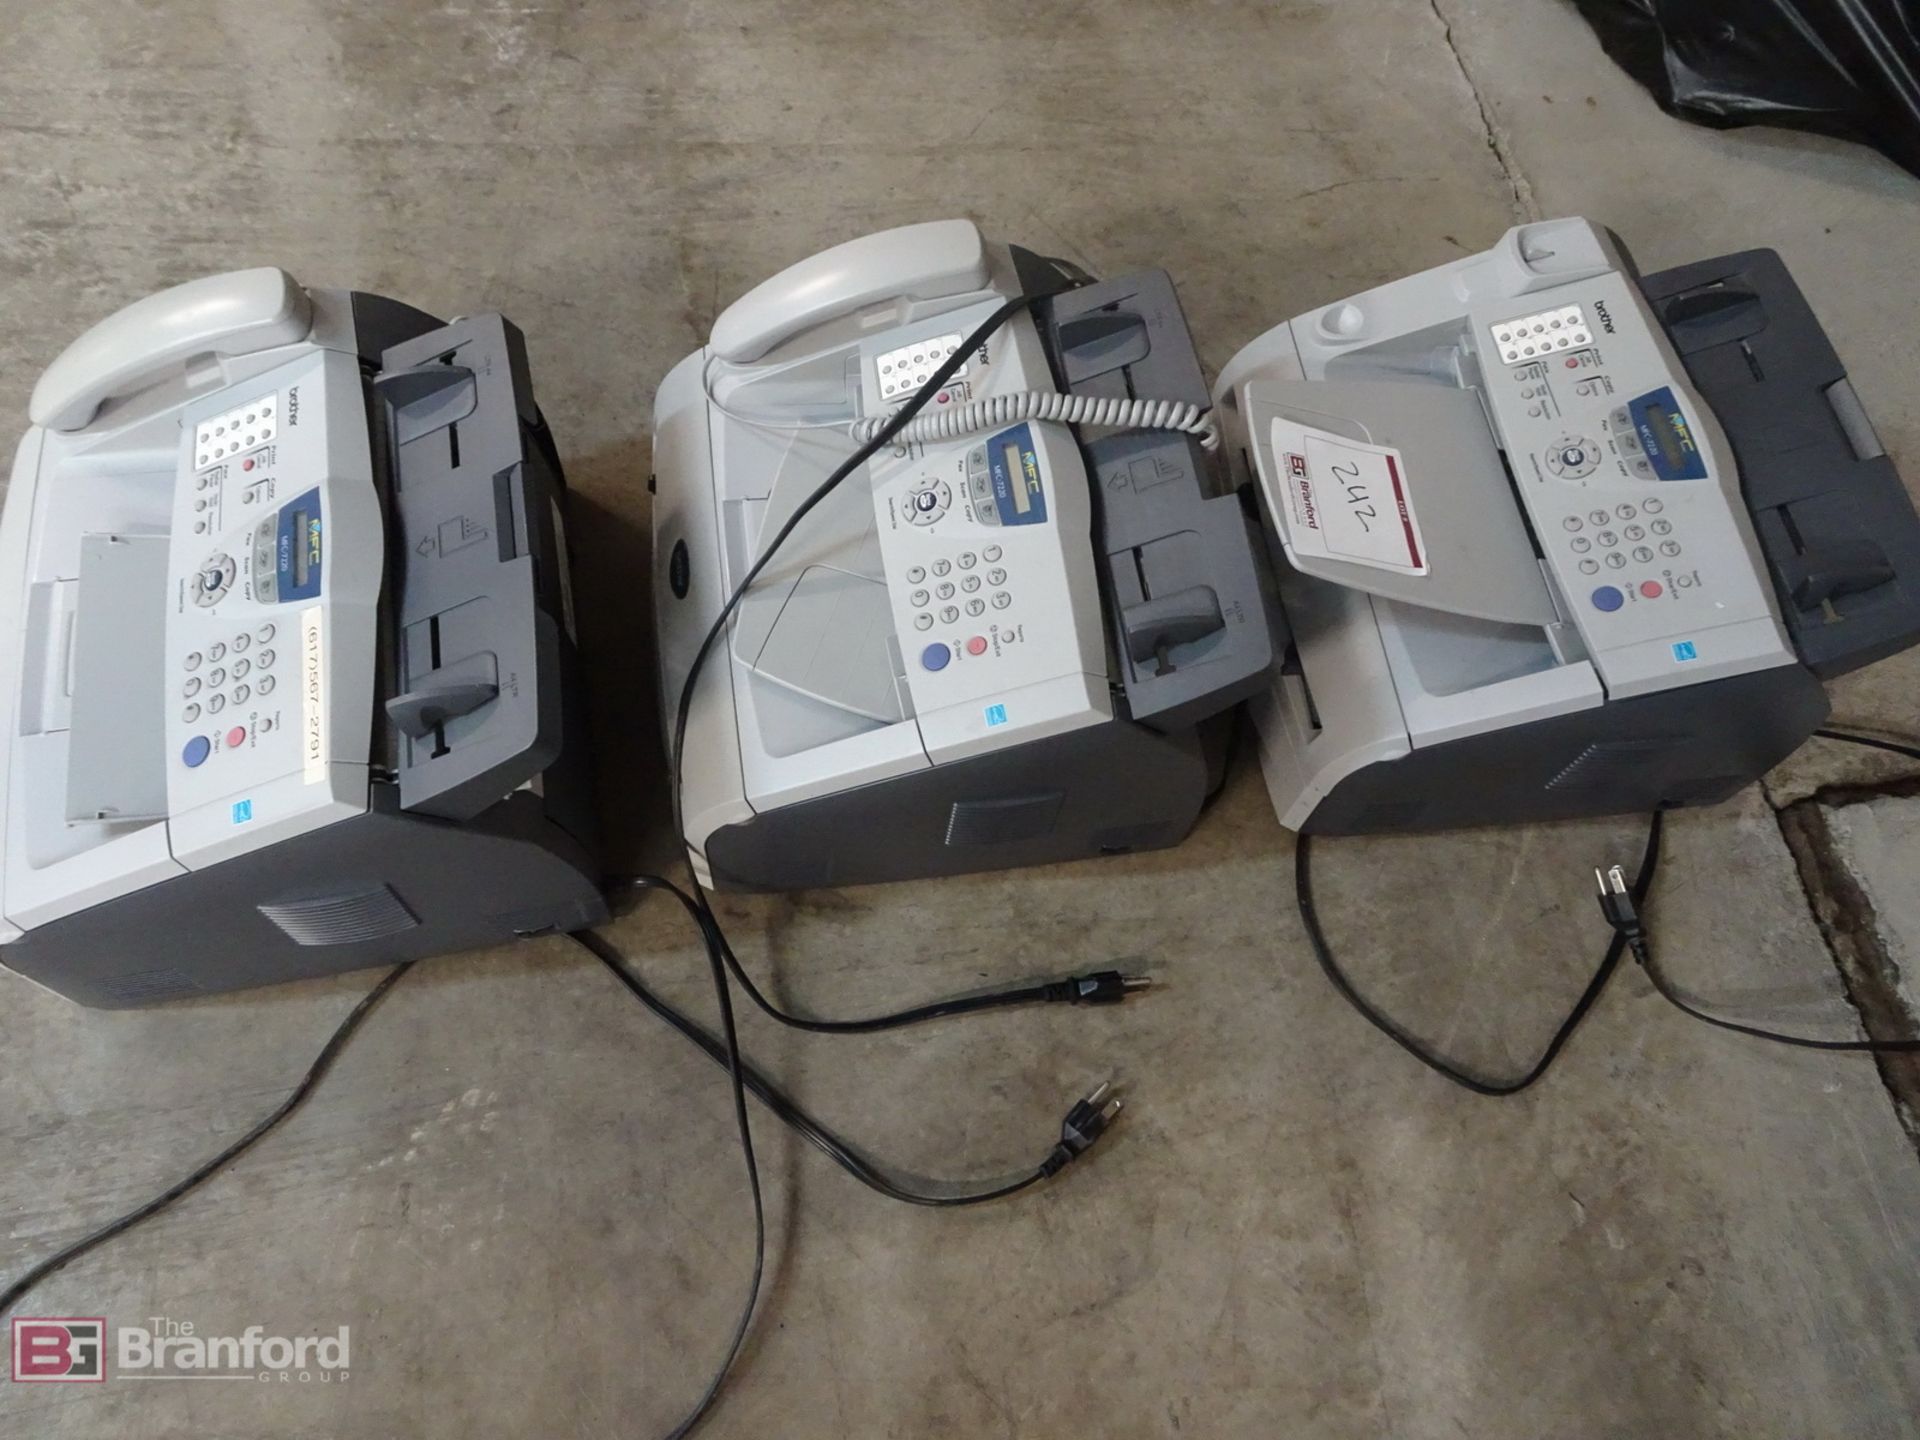 (3) Brother Fax/Printers MFC-7220